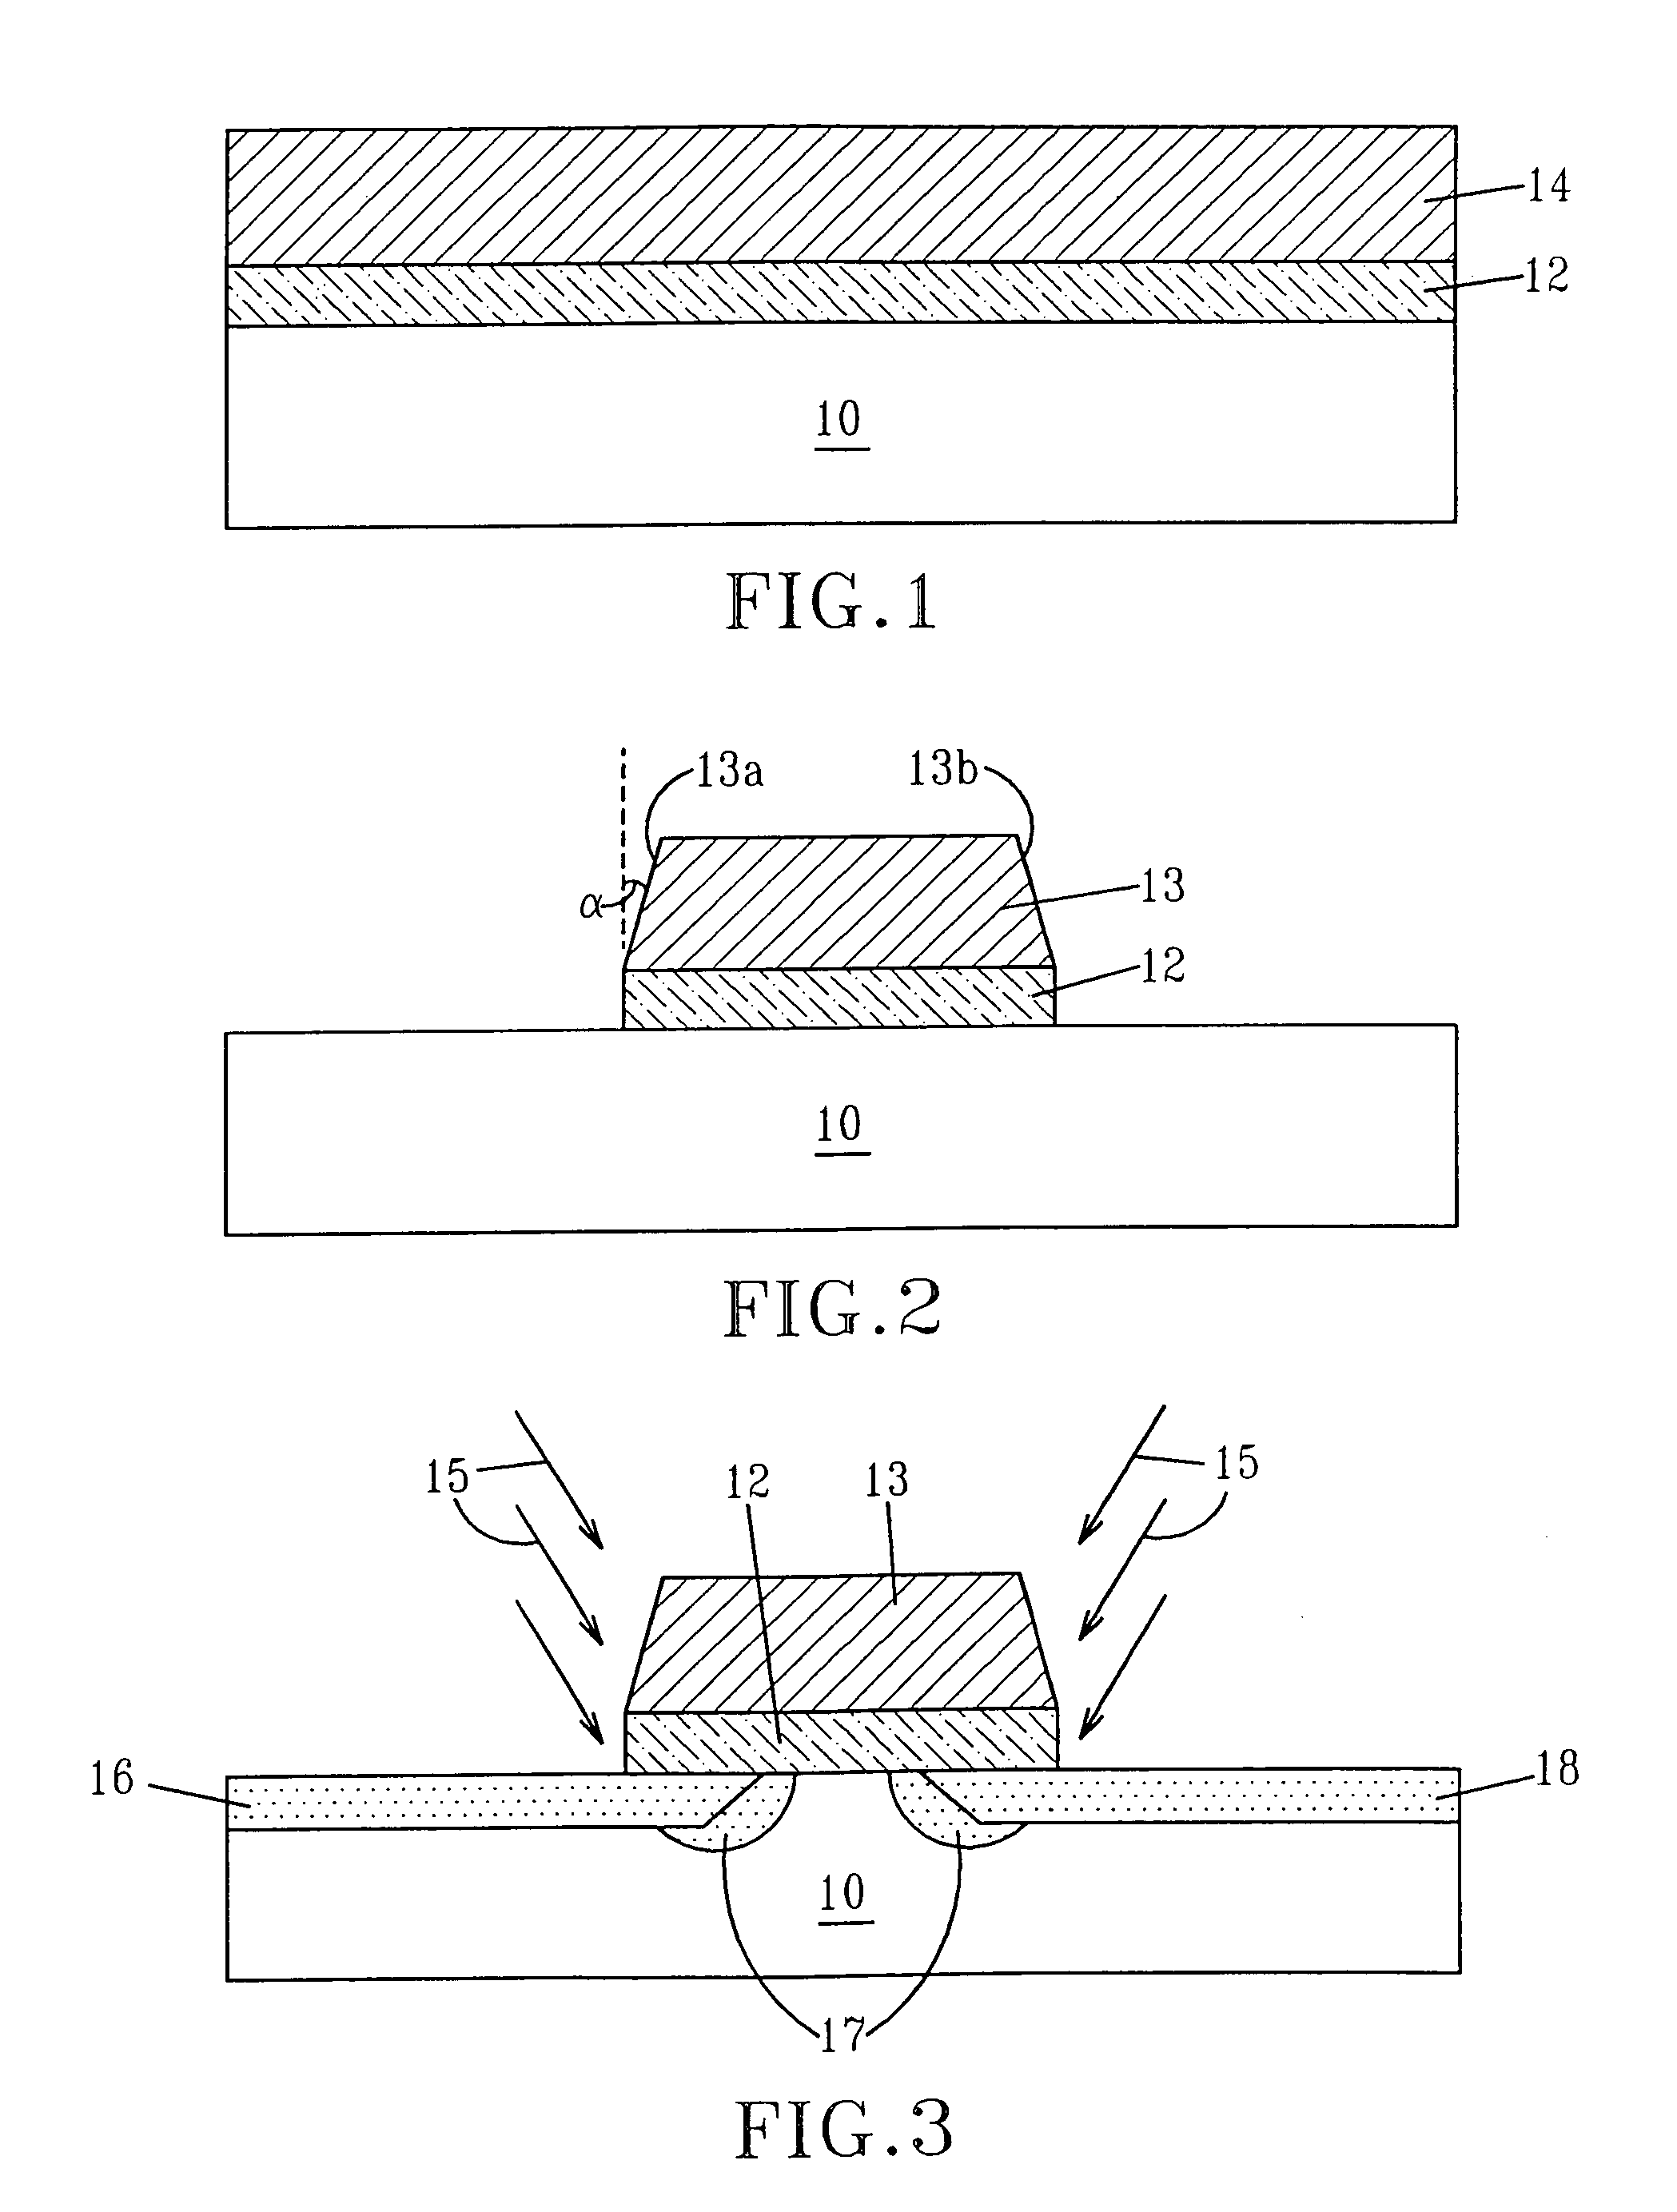 MOSFET with high angle sidewall gate and contacts for reduced miller capacitance